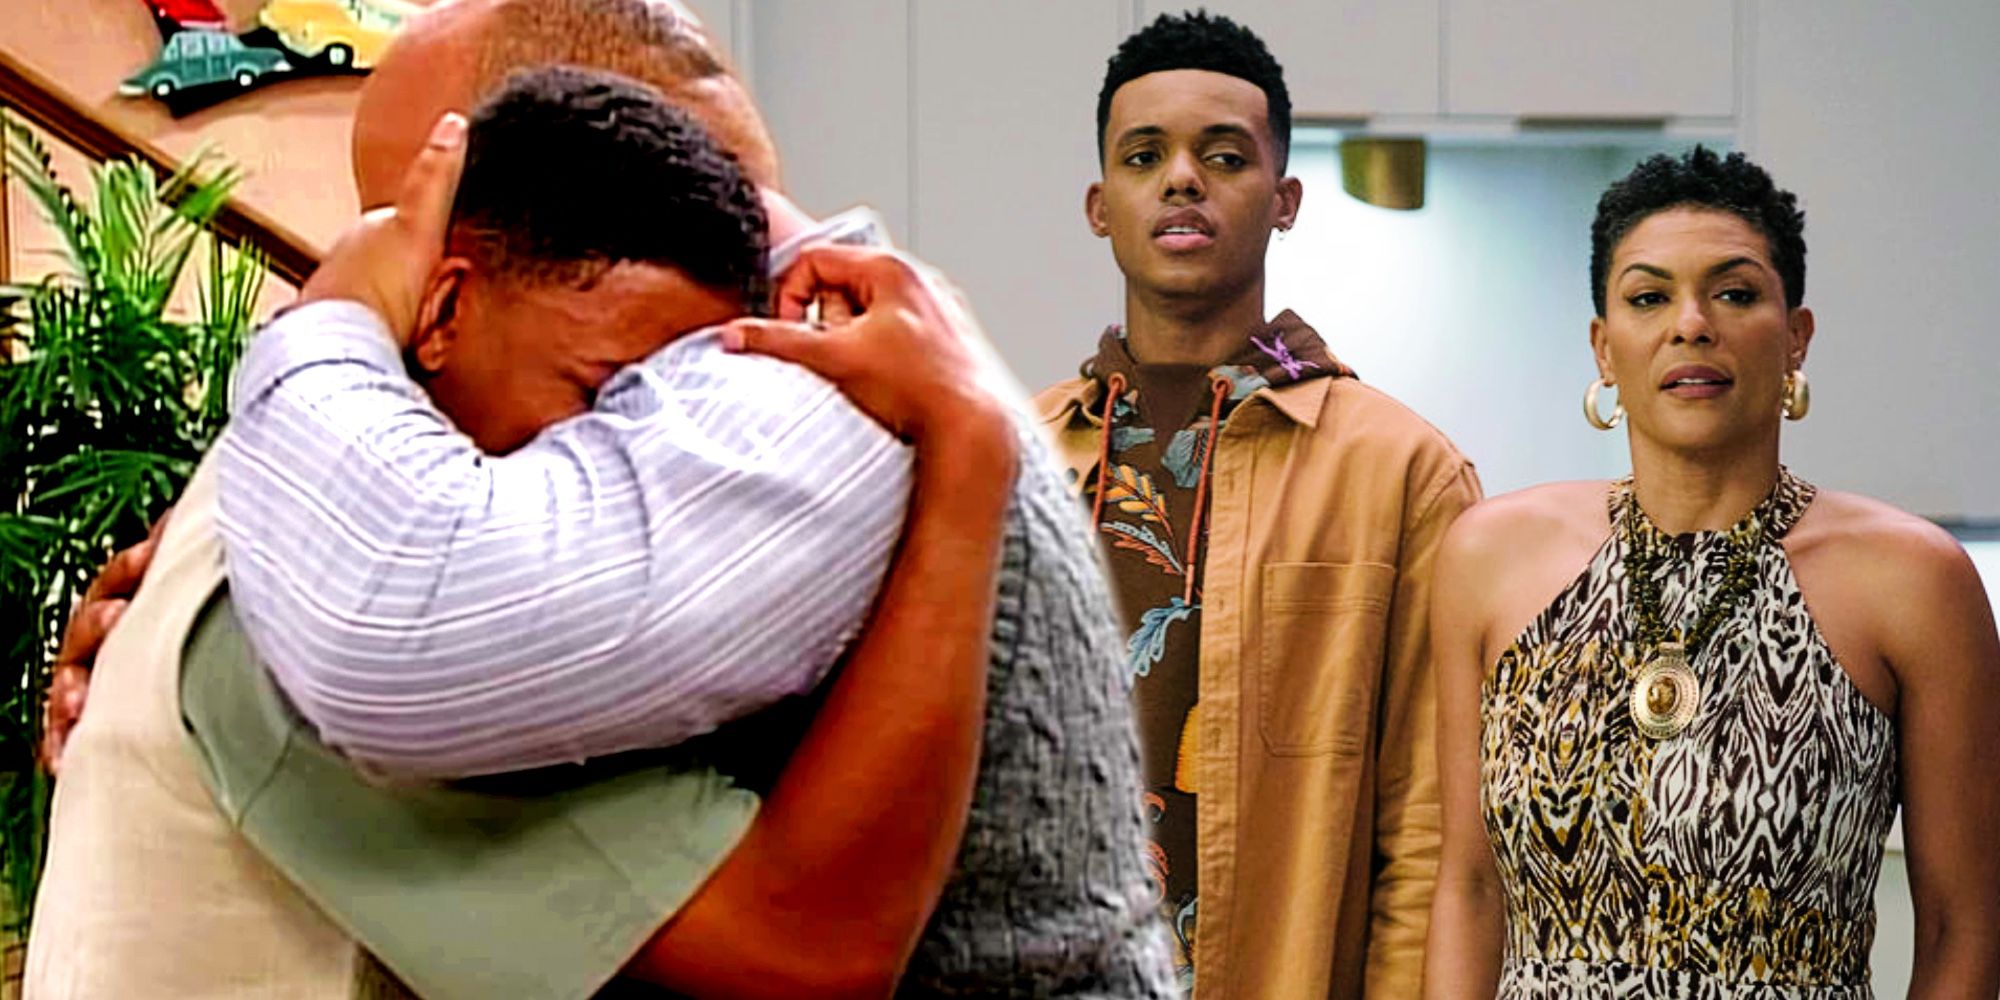 bel air fresh prince will vy uncle phil heartbreaking scene